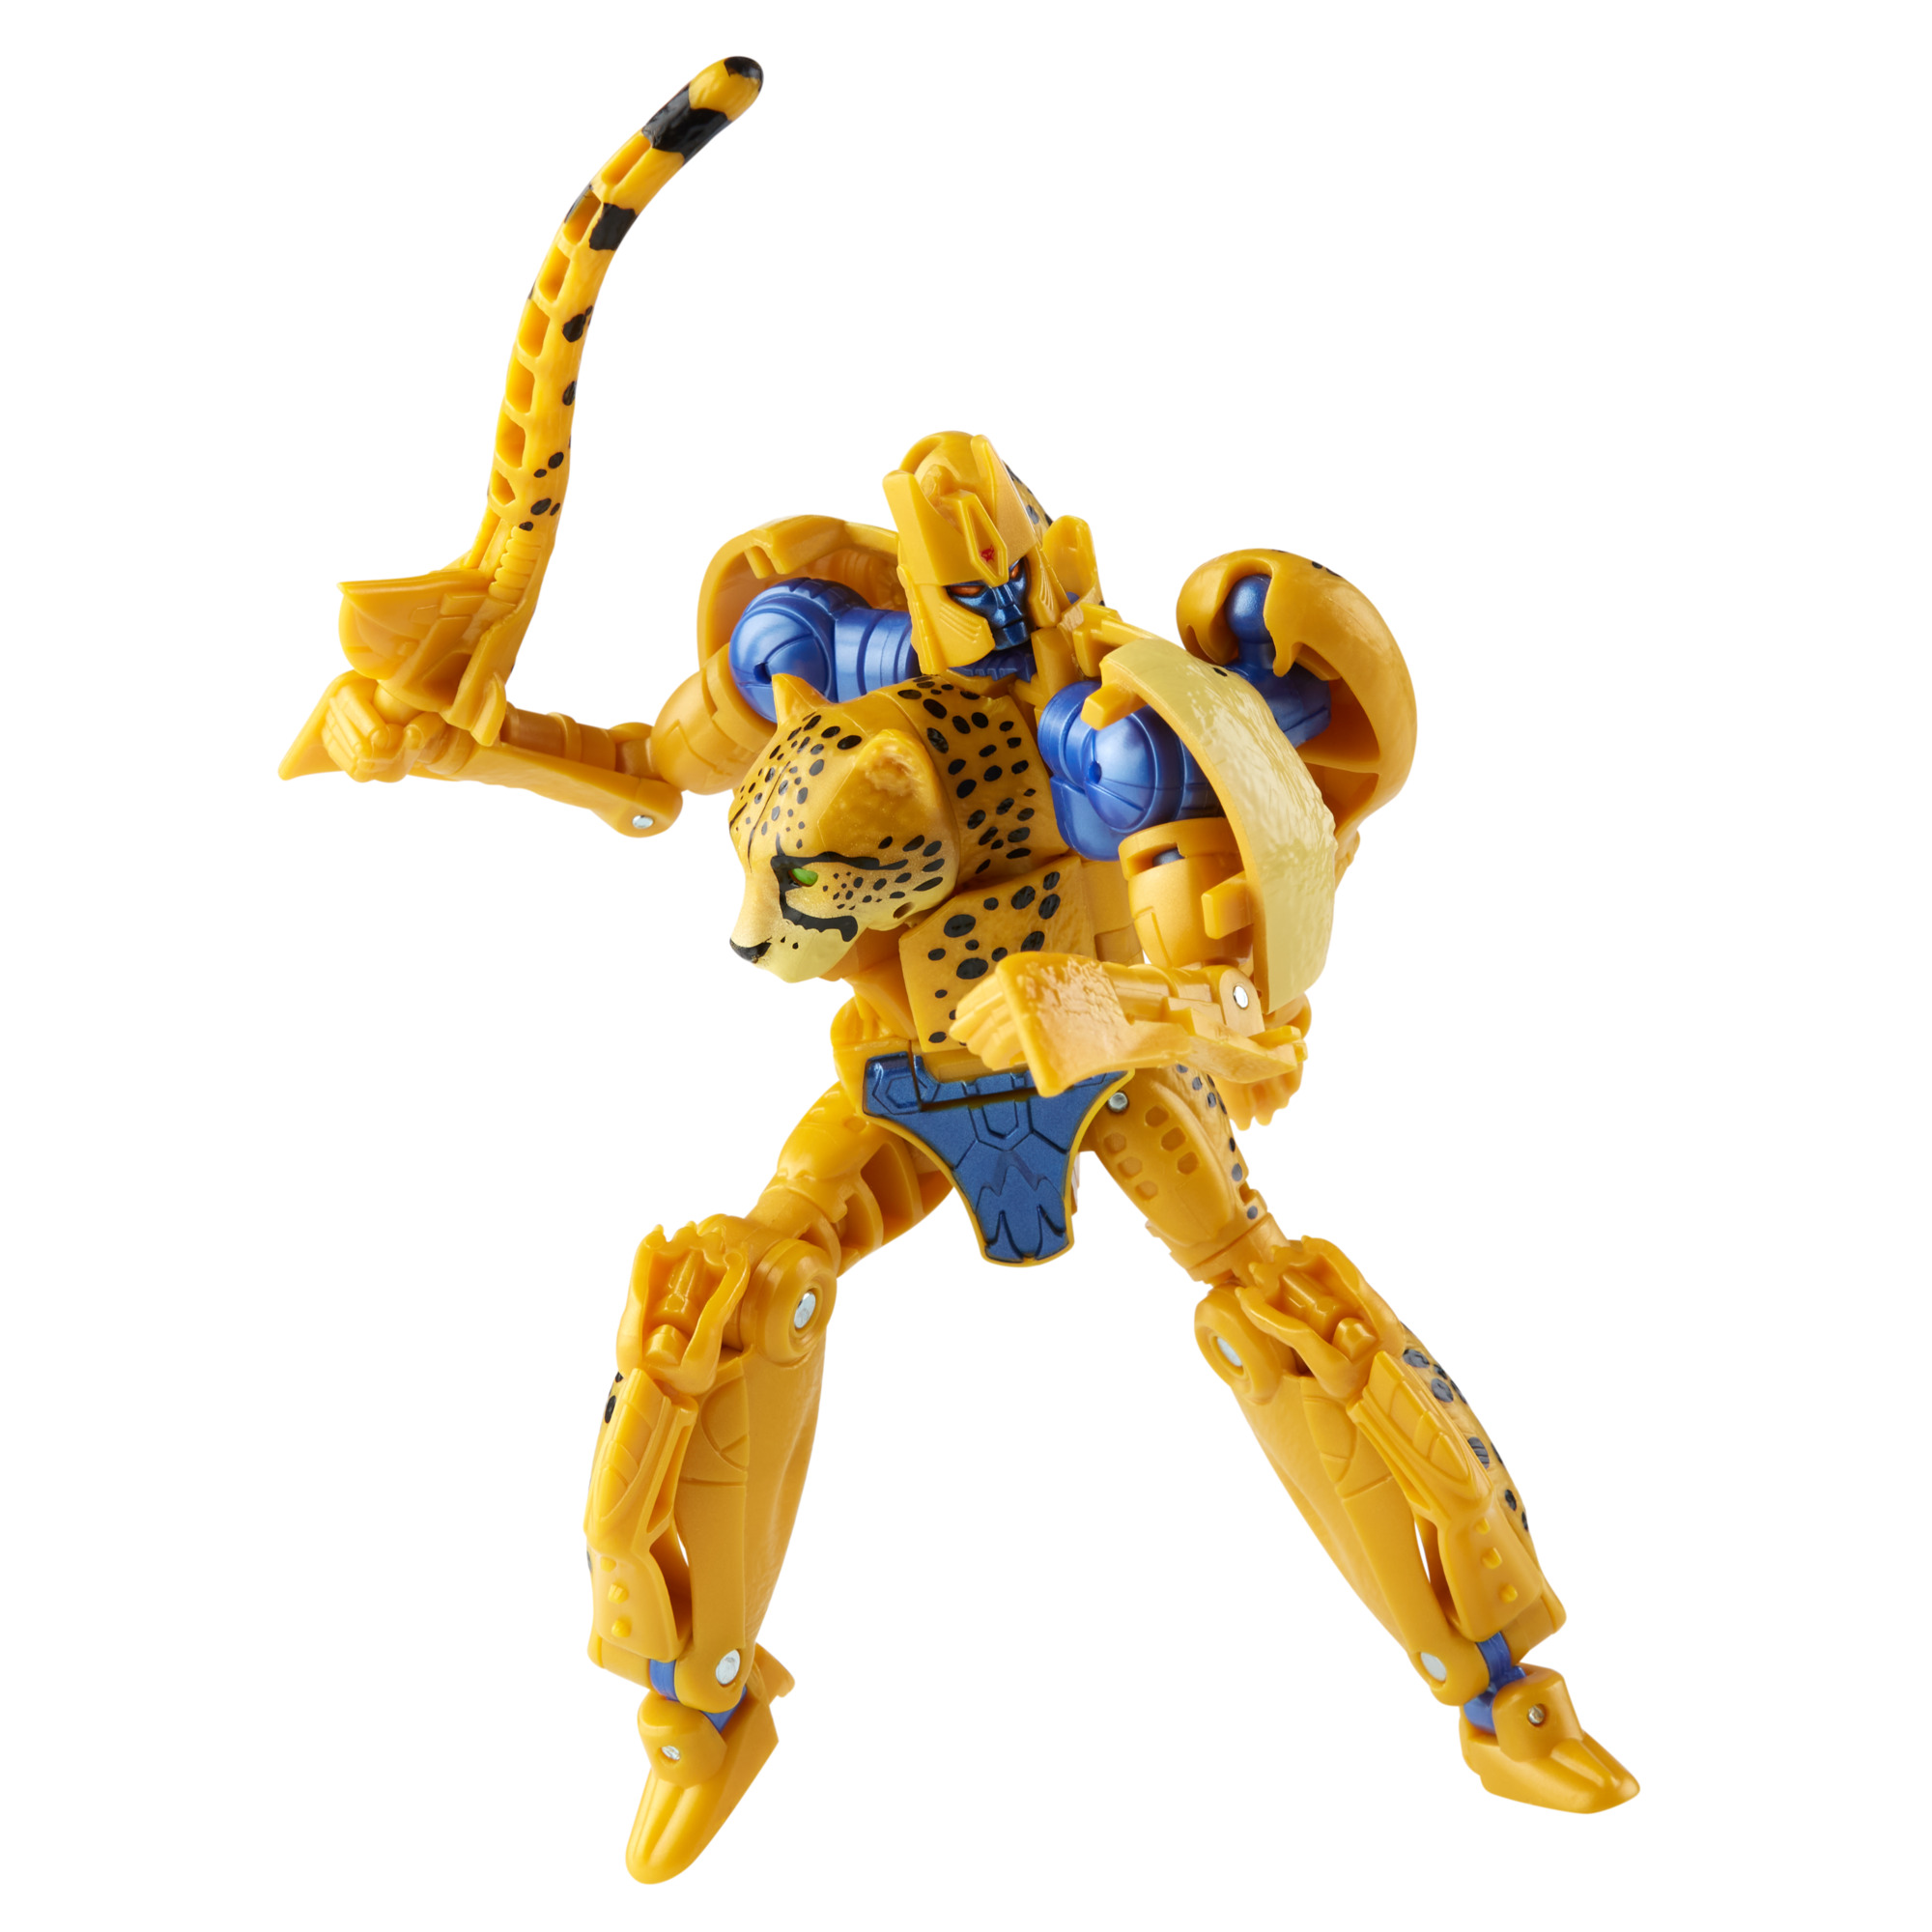 Transformers: War for Cybertron Cheetor Kids Toy Action Figure for Boys and Girls - image 5 of 7